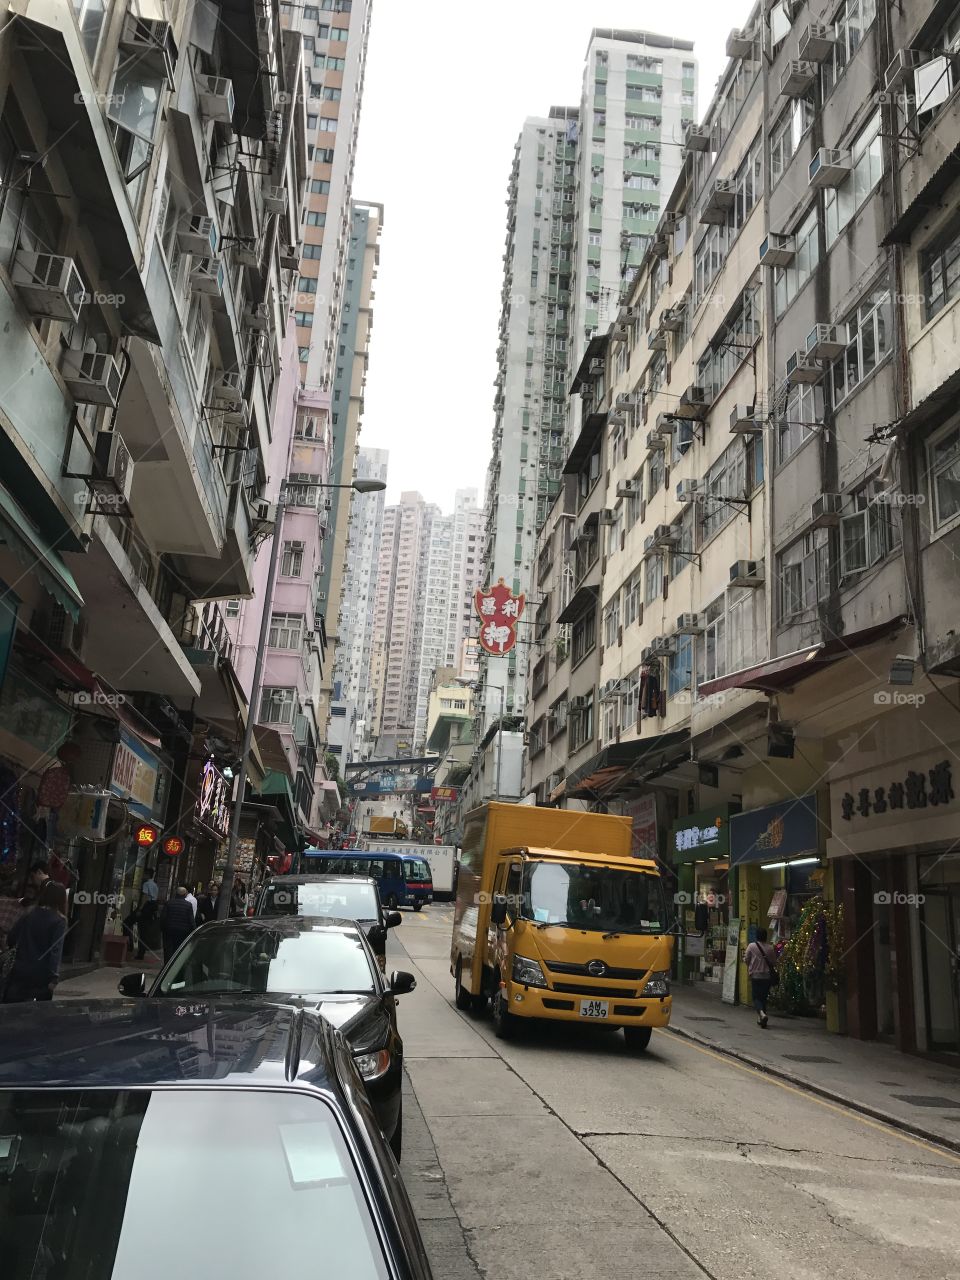 Street view of Hong Kong, tall buildings, cars on the street 